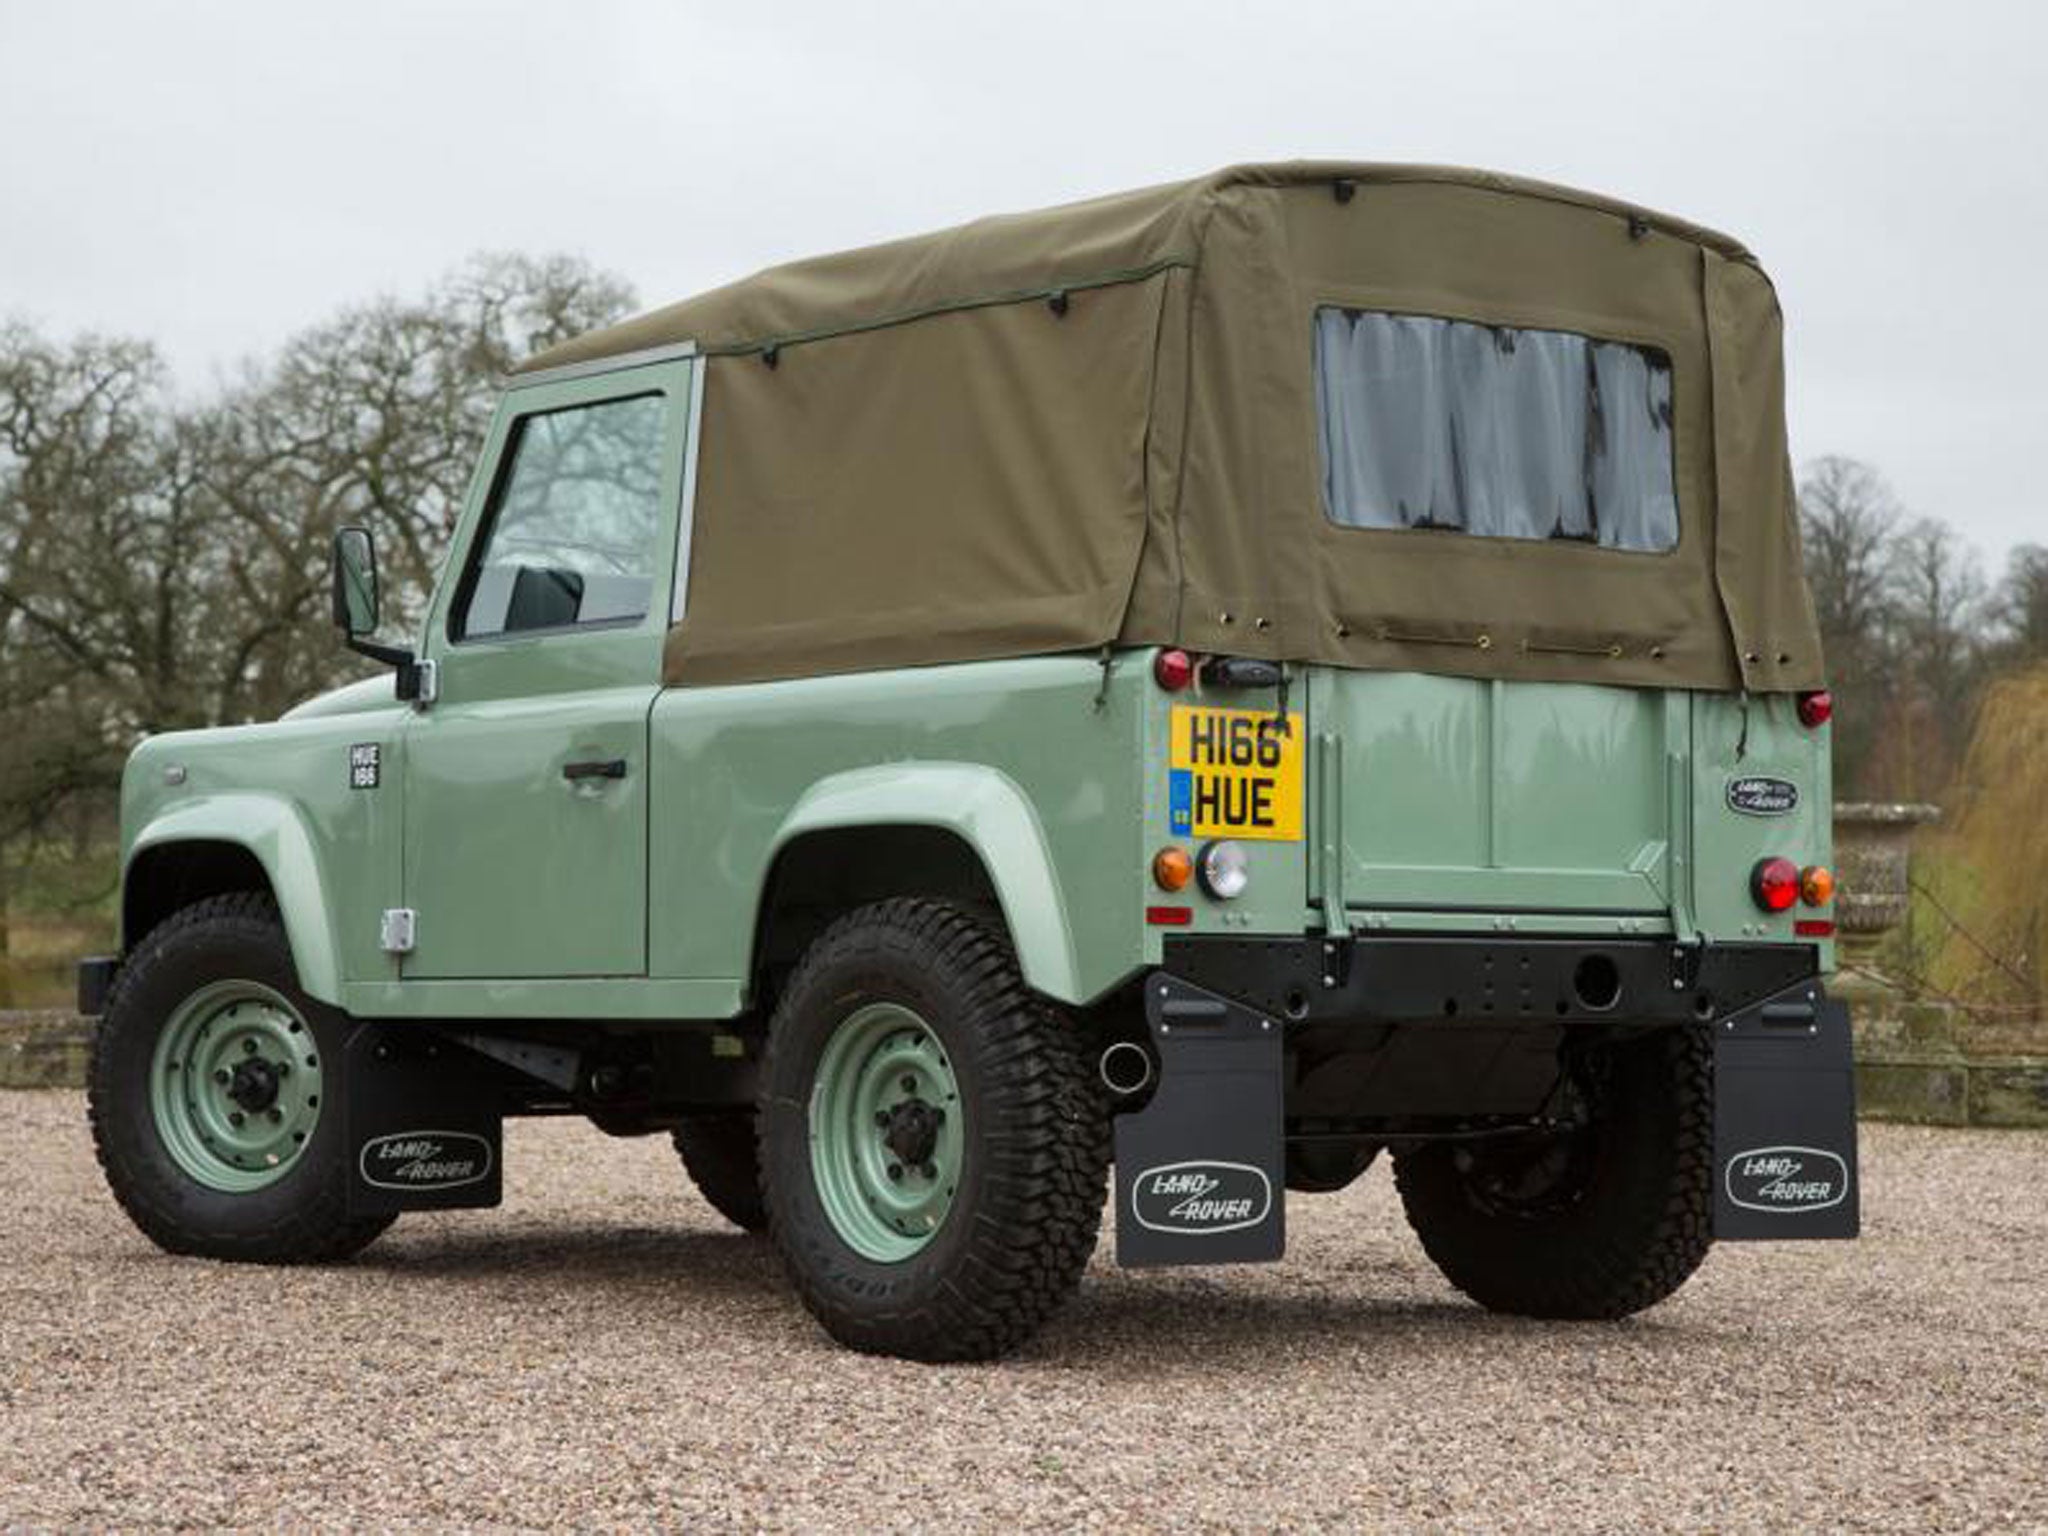 The last Defender 90 Heritage emulated the original car’s looks and spec